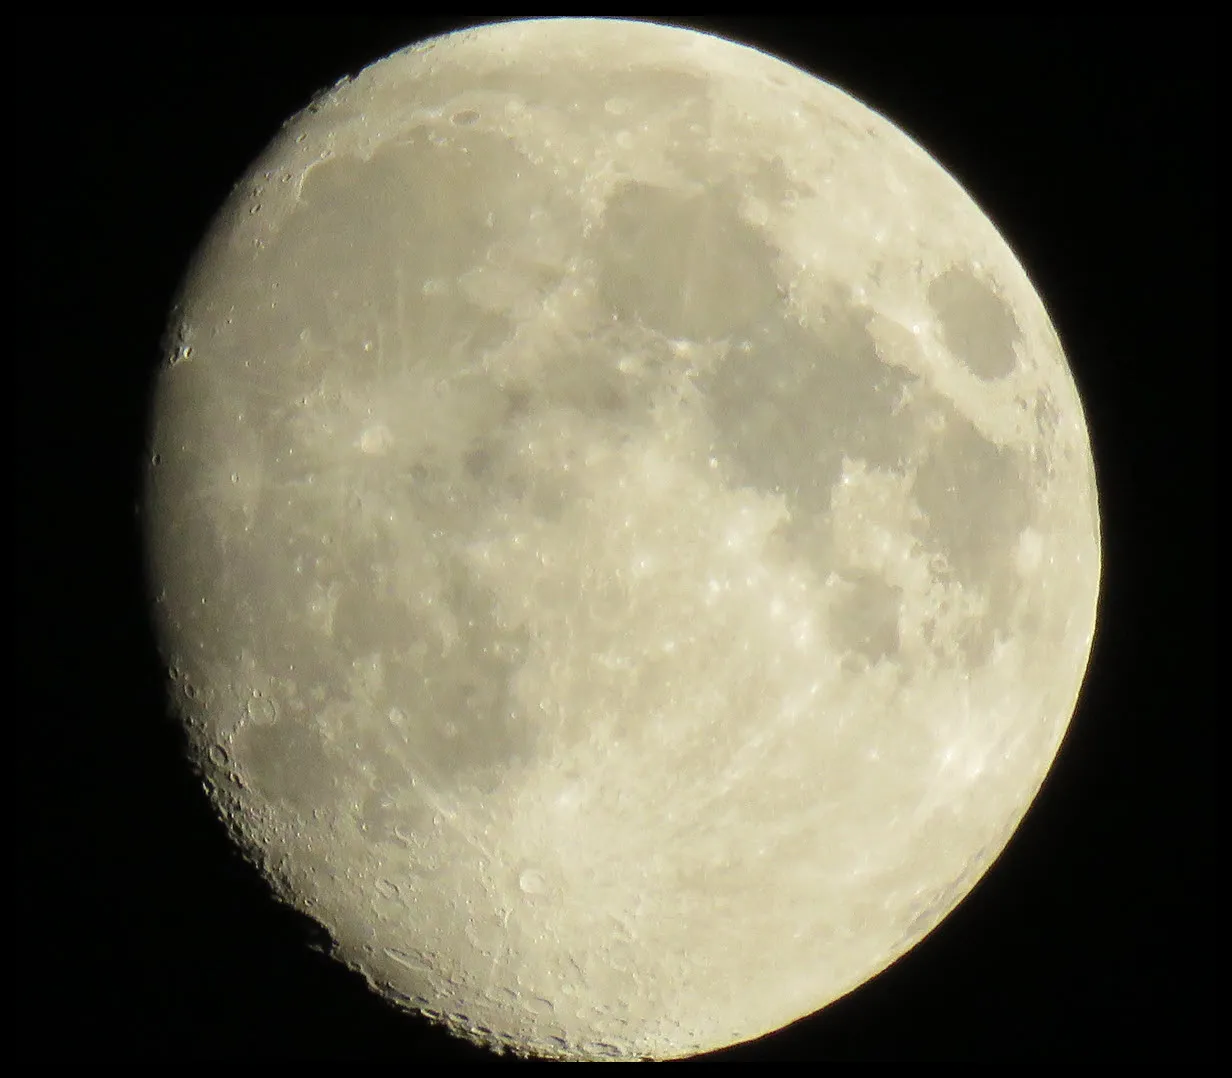 close up showing details on surface of almost full moon.JPG